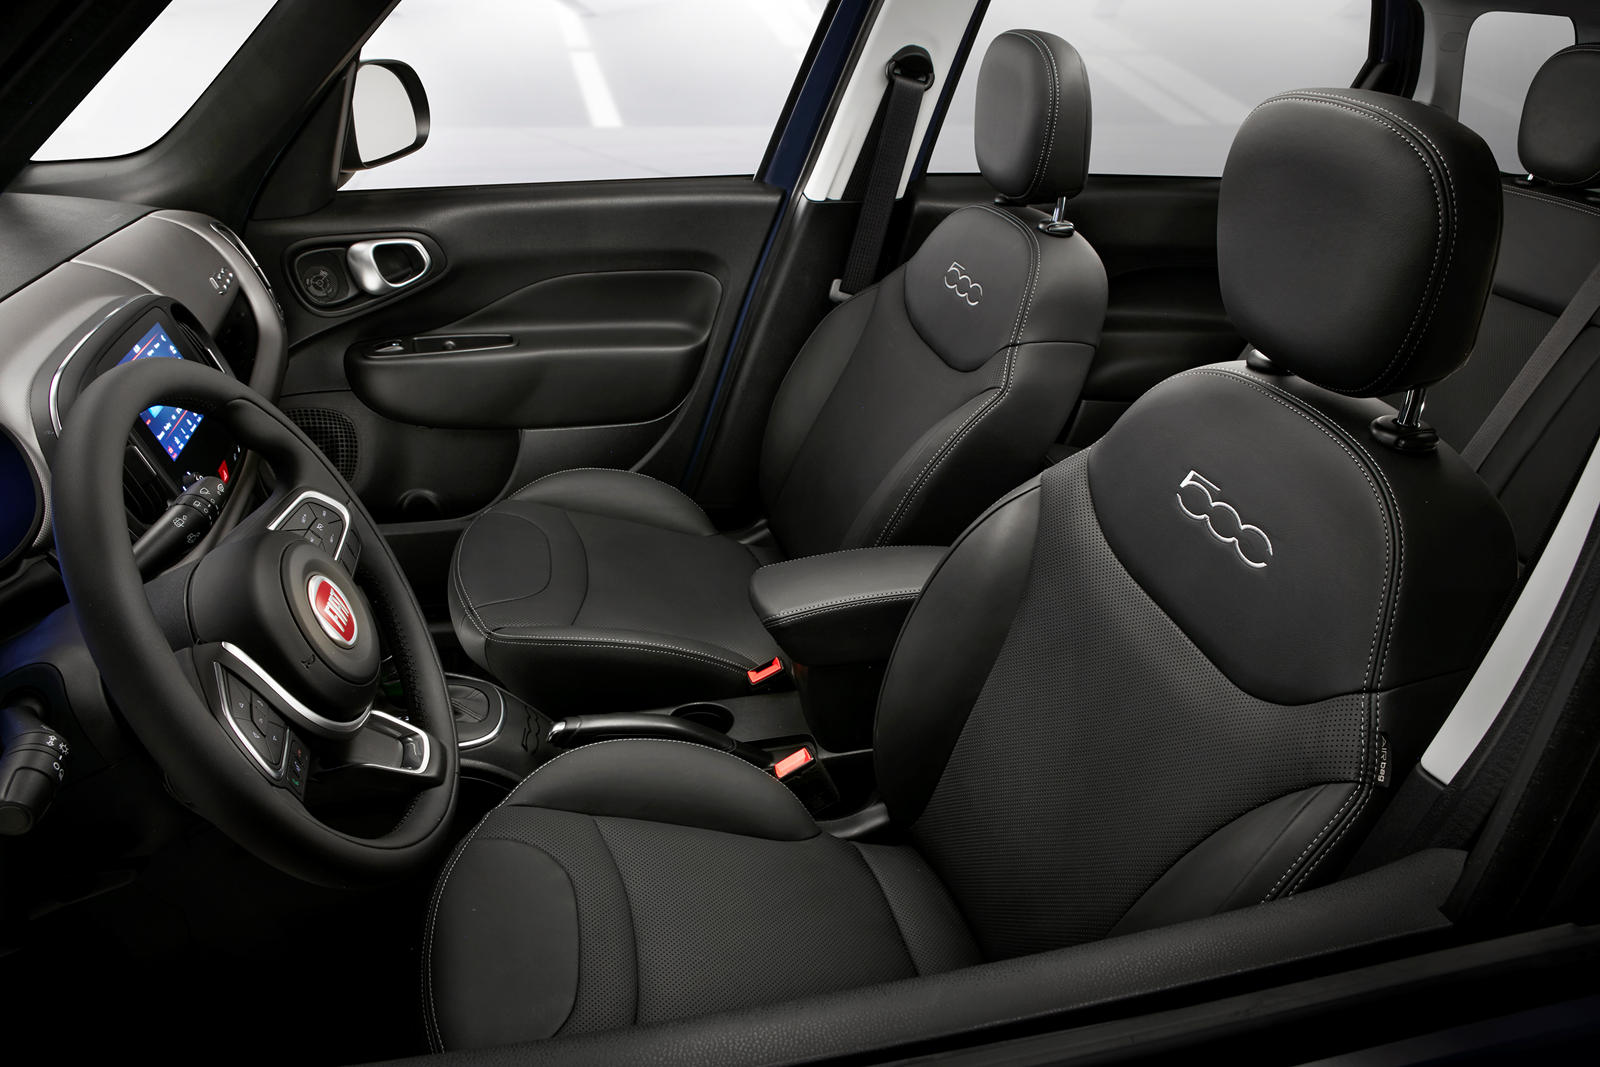 2020 Fiat 500L Interior Dimensions: Seating, Cargo Space & Trunk Size -  Photos | CarBuzz